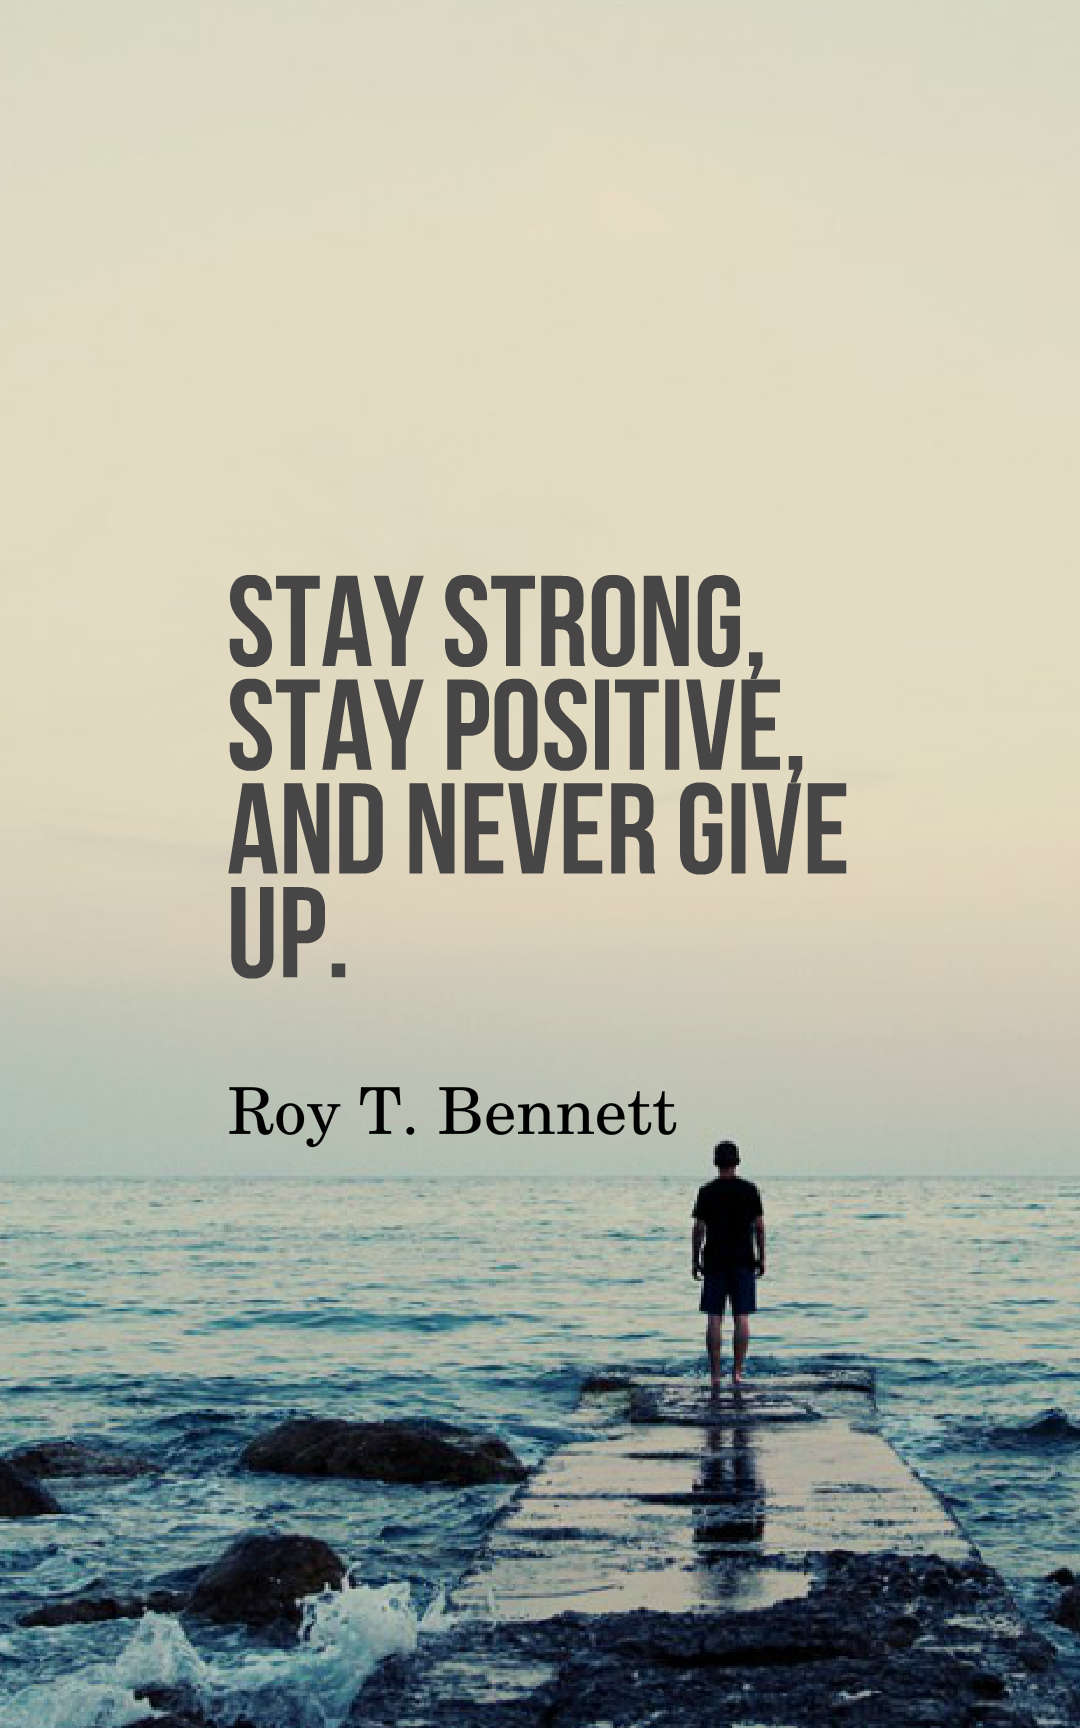 Stay strong, stay positive, and never give up.